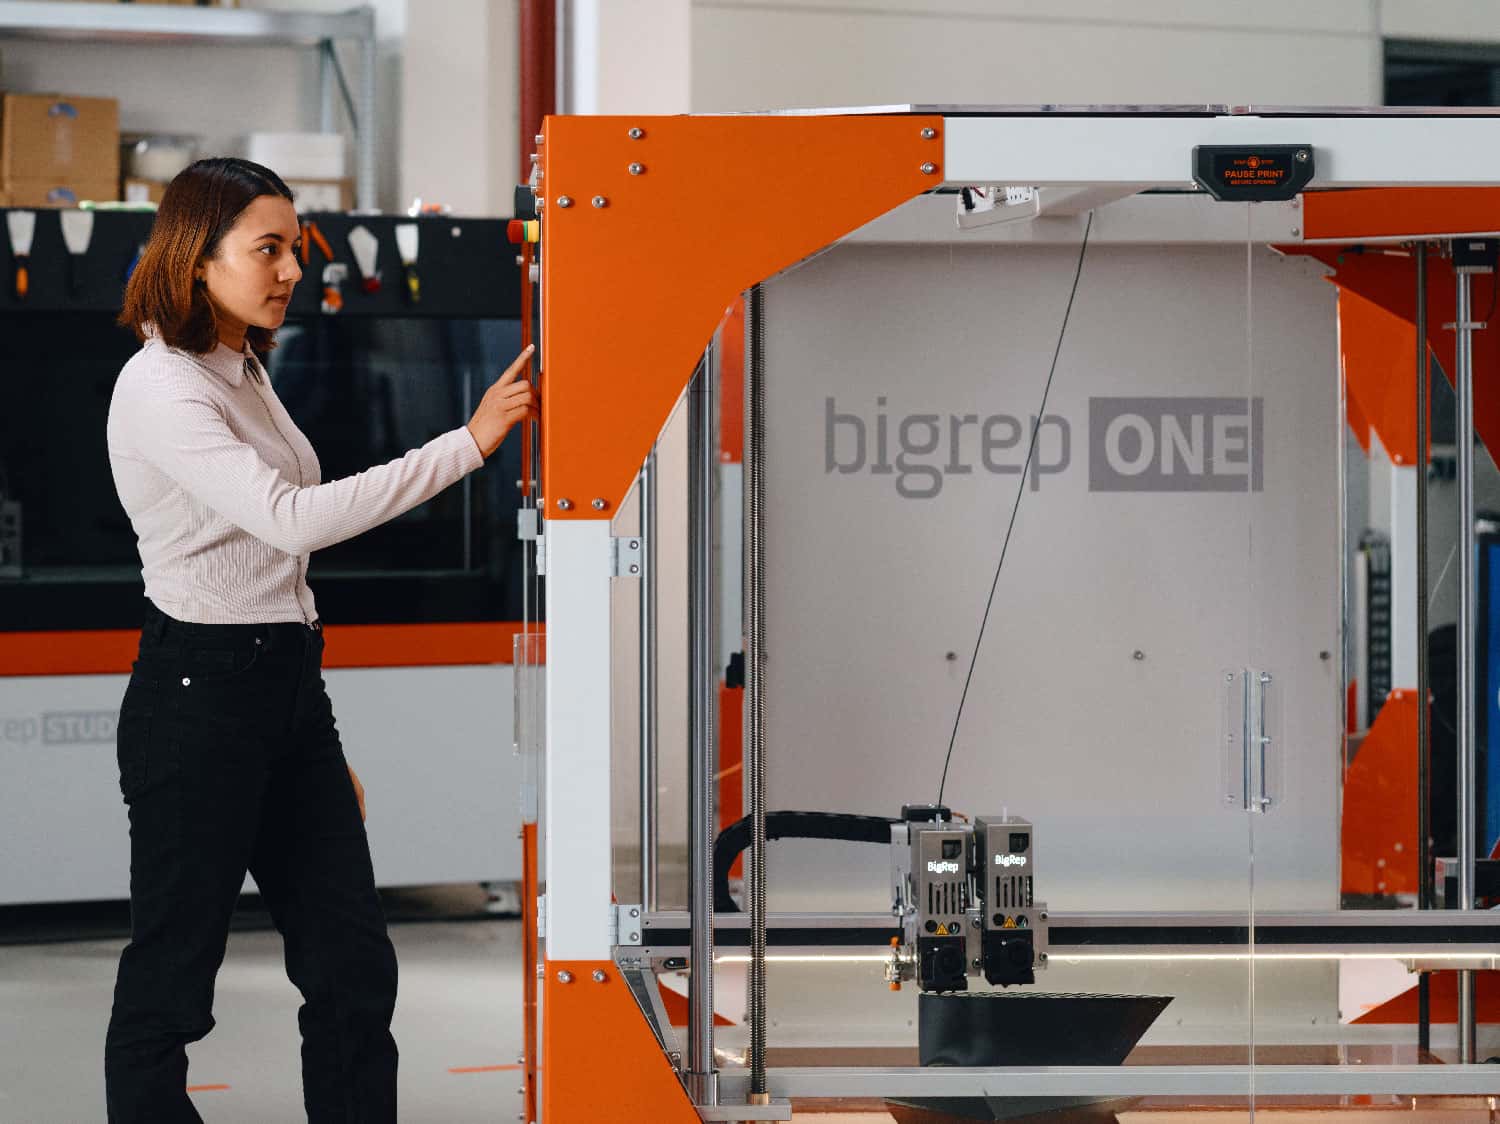 How to Choose Which Features You Need on the Modular BigRep ONE 3D Printer